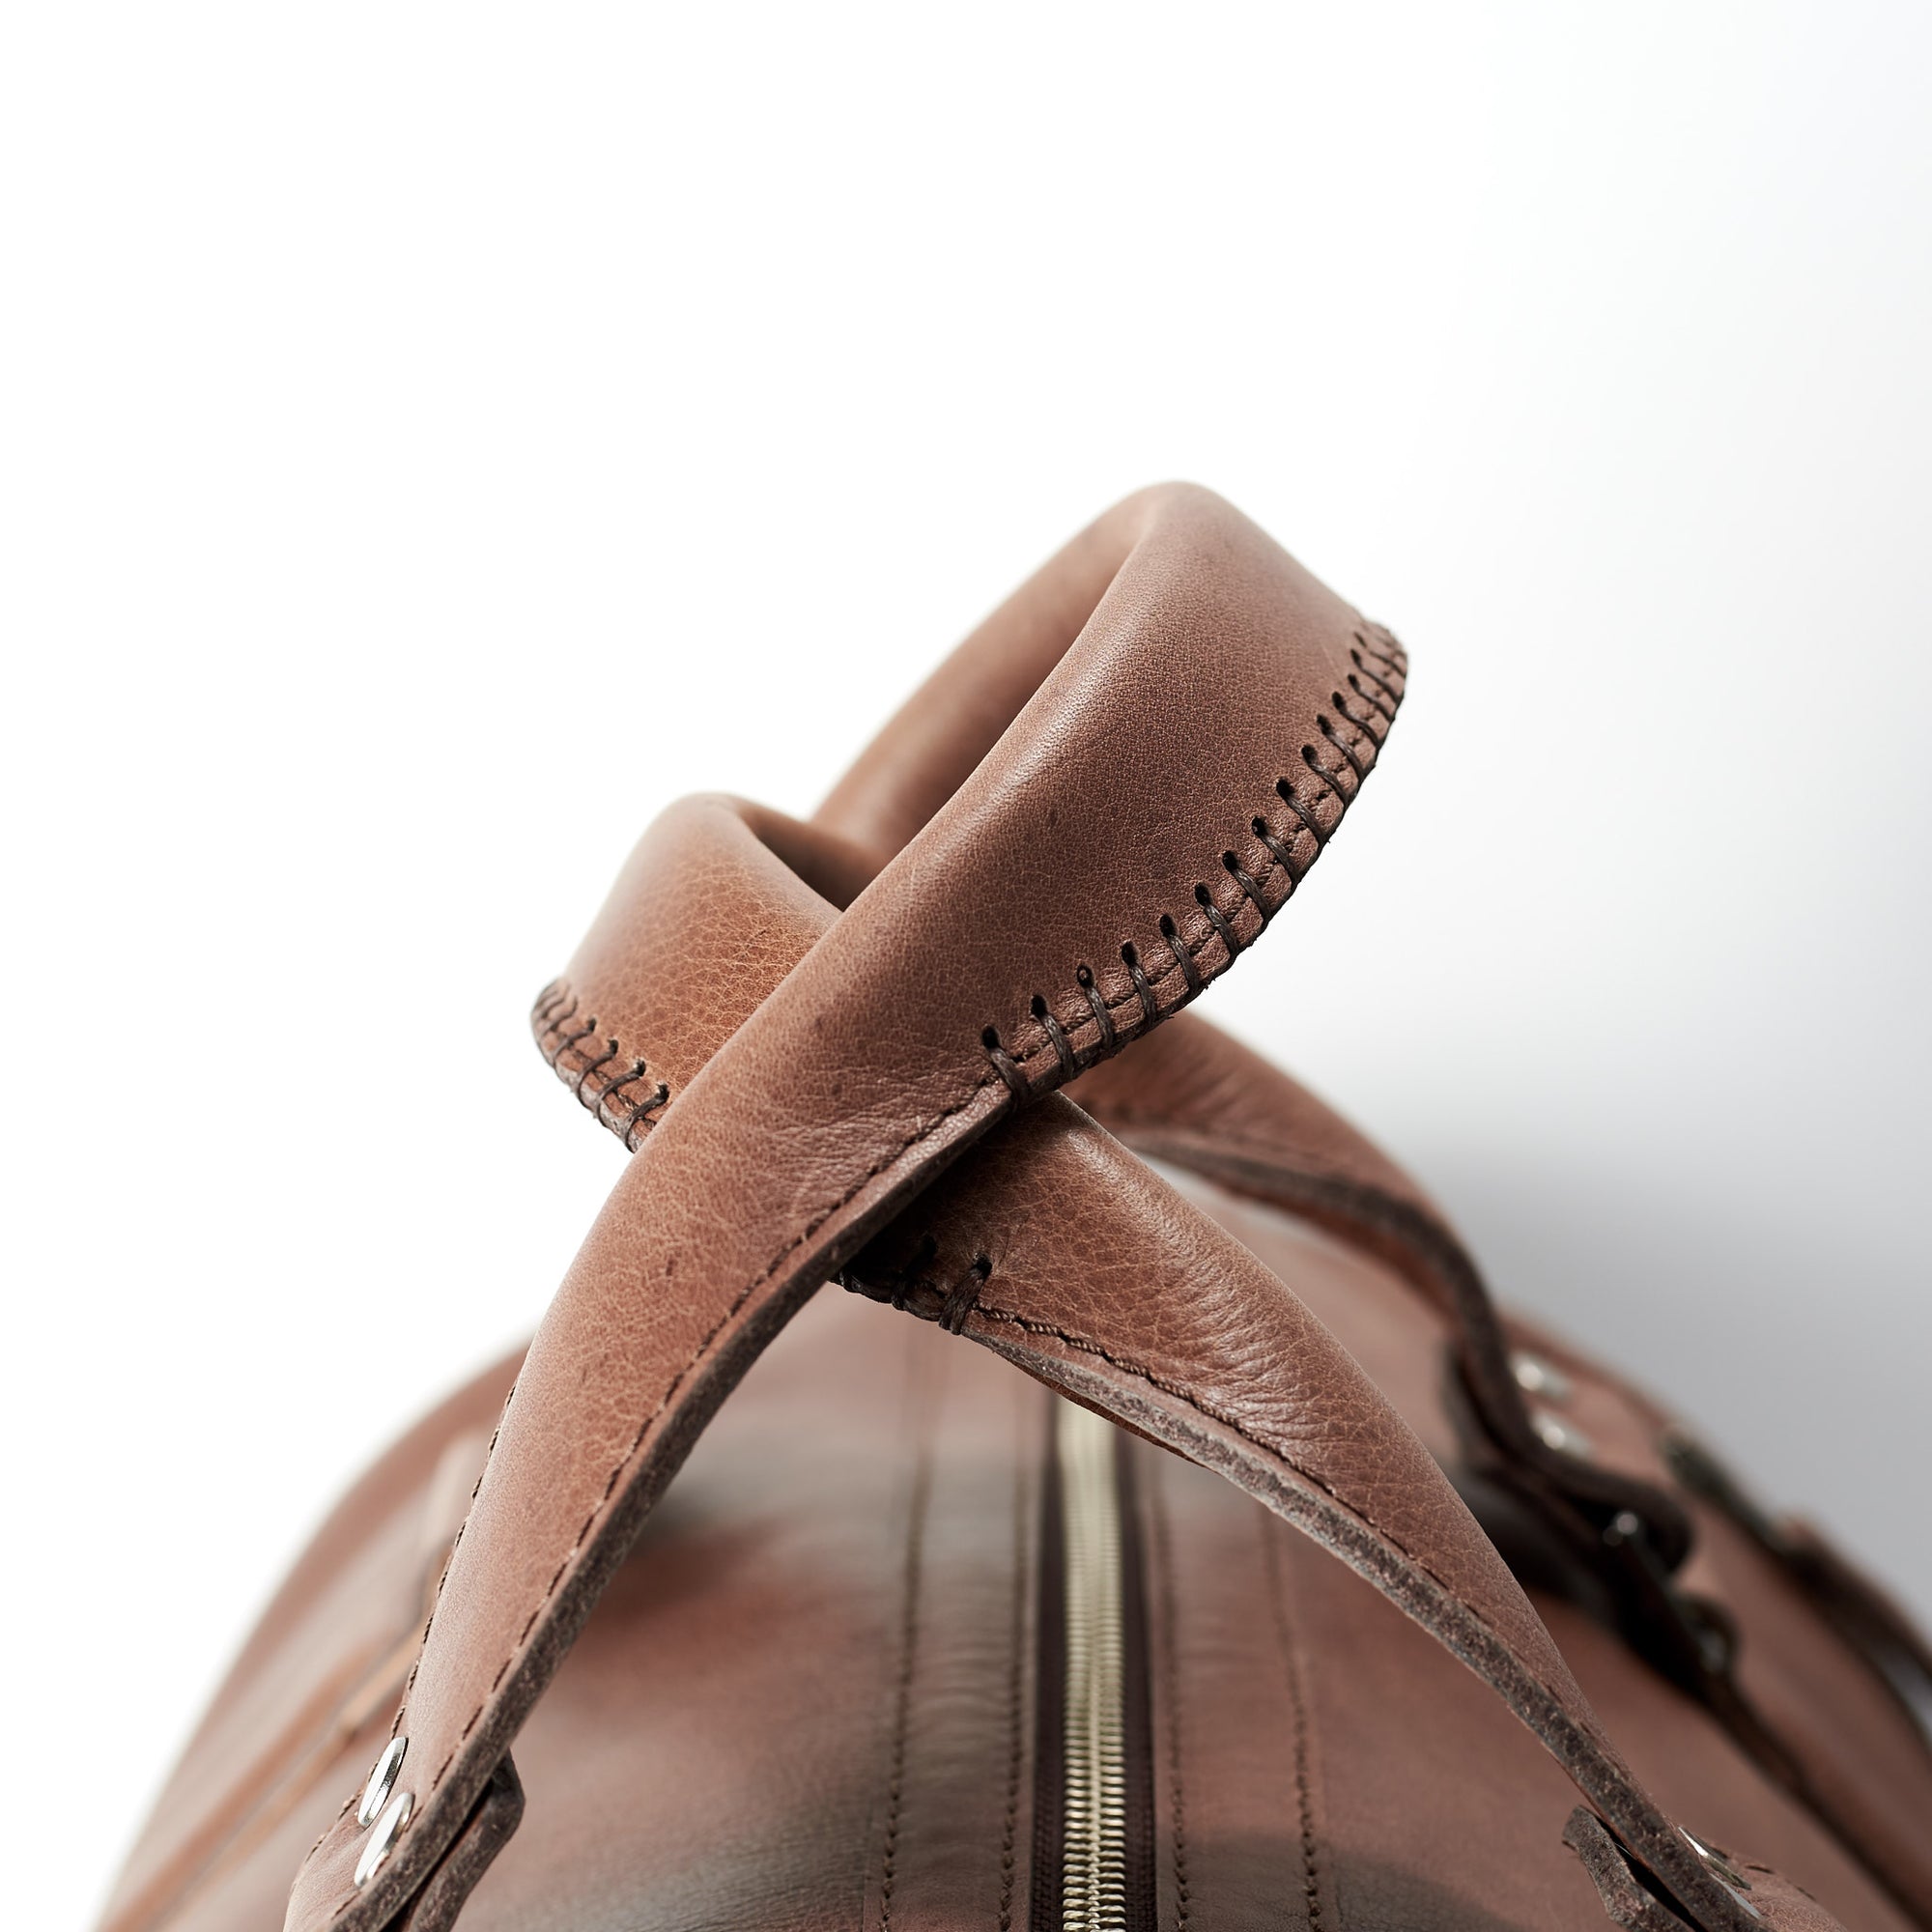 Hand stitched leather handles. Brown leather carryall bag. Mens travel weekender bag